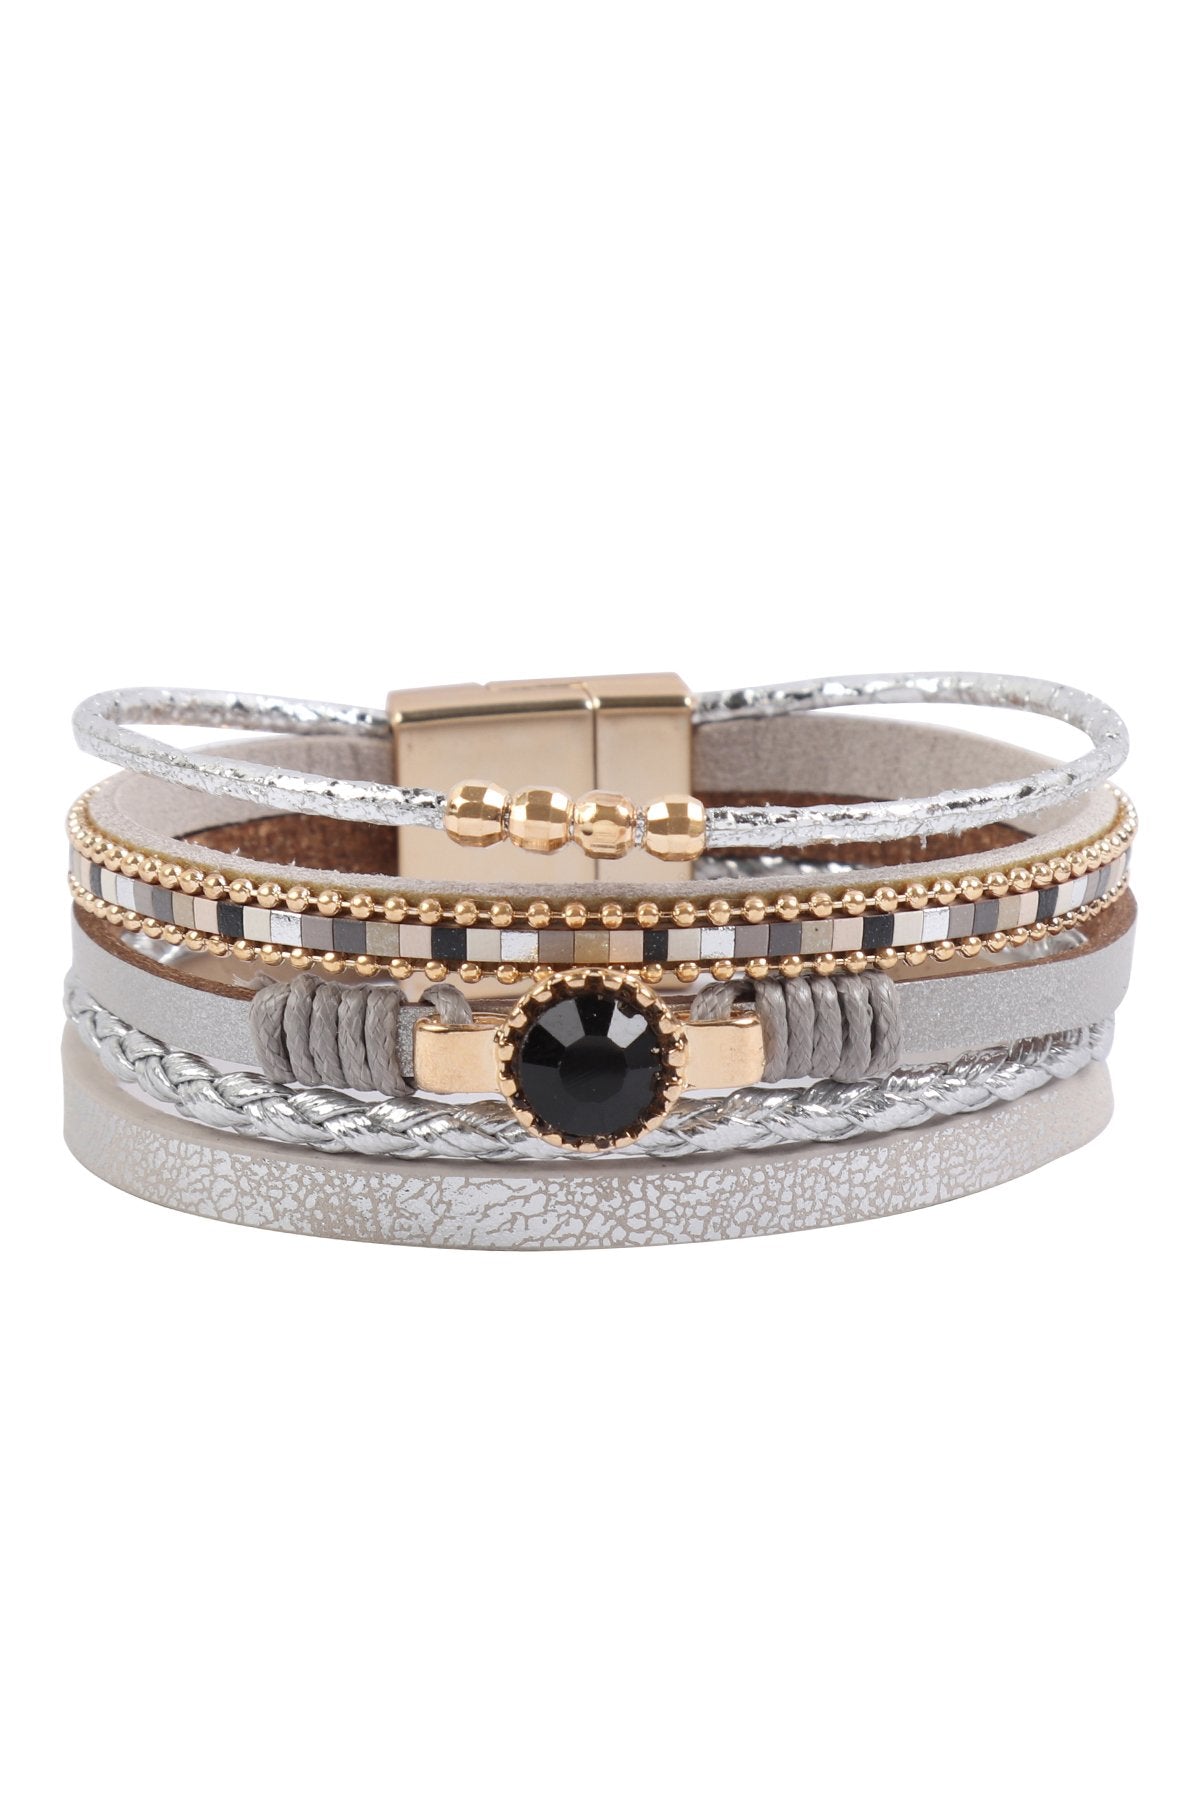 Hdb3157 - Multi Line Leather Charm With Magnetic Lock Bracelet